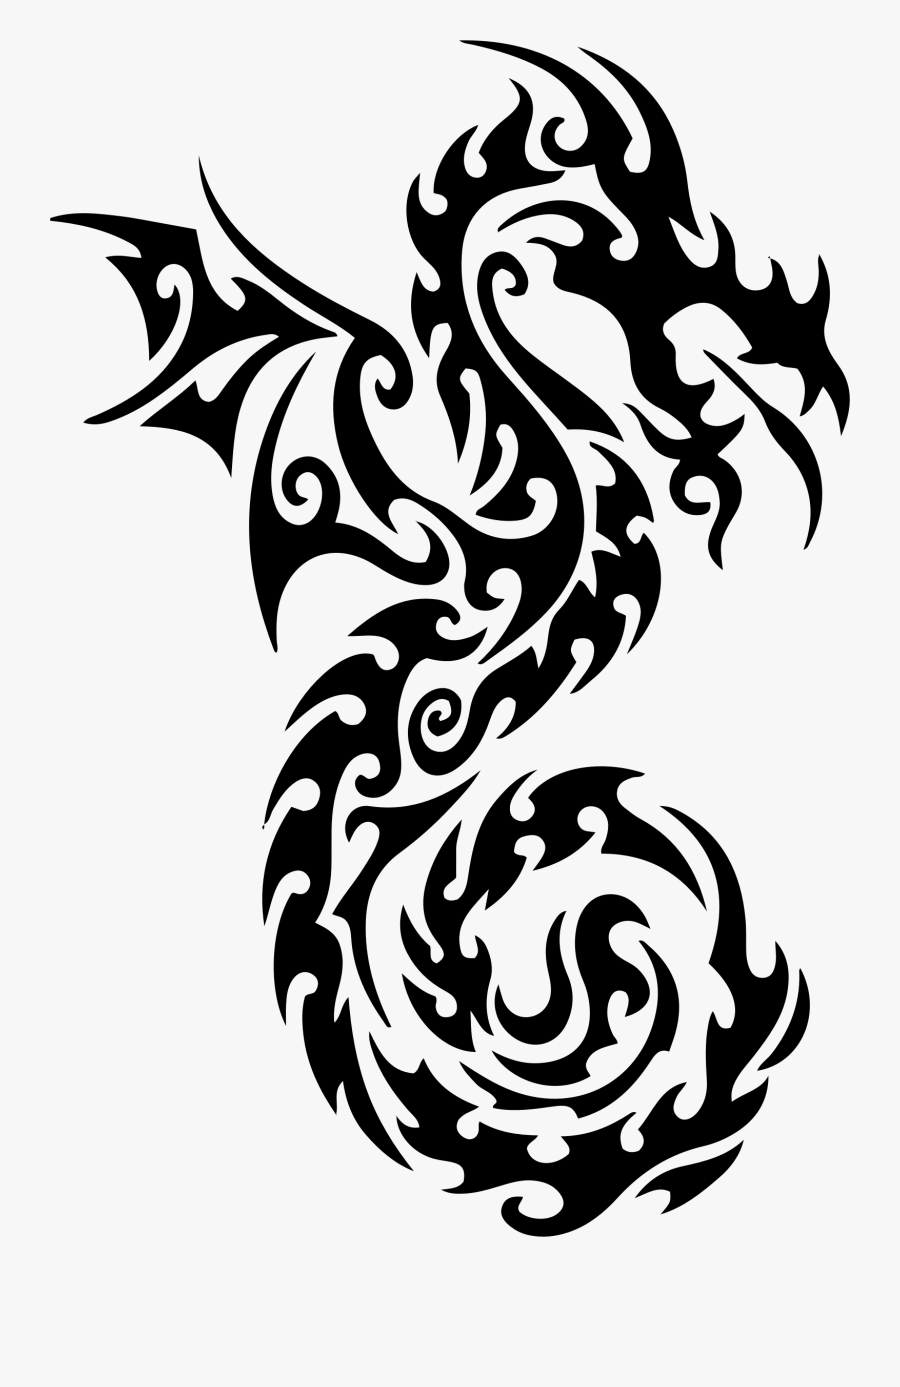 Transparent Seahorse Clipart Black And White - Dragon Japanese Dragon Drawings, Transparent Clipart